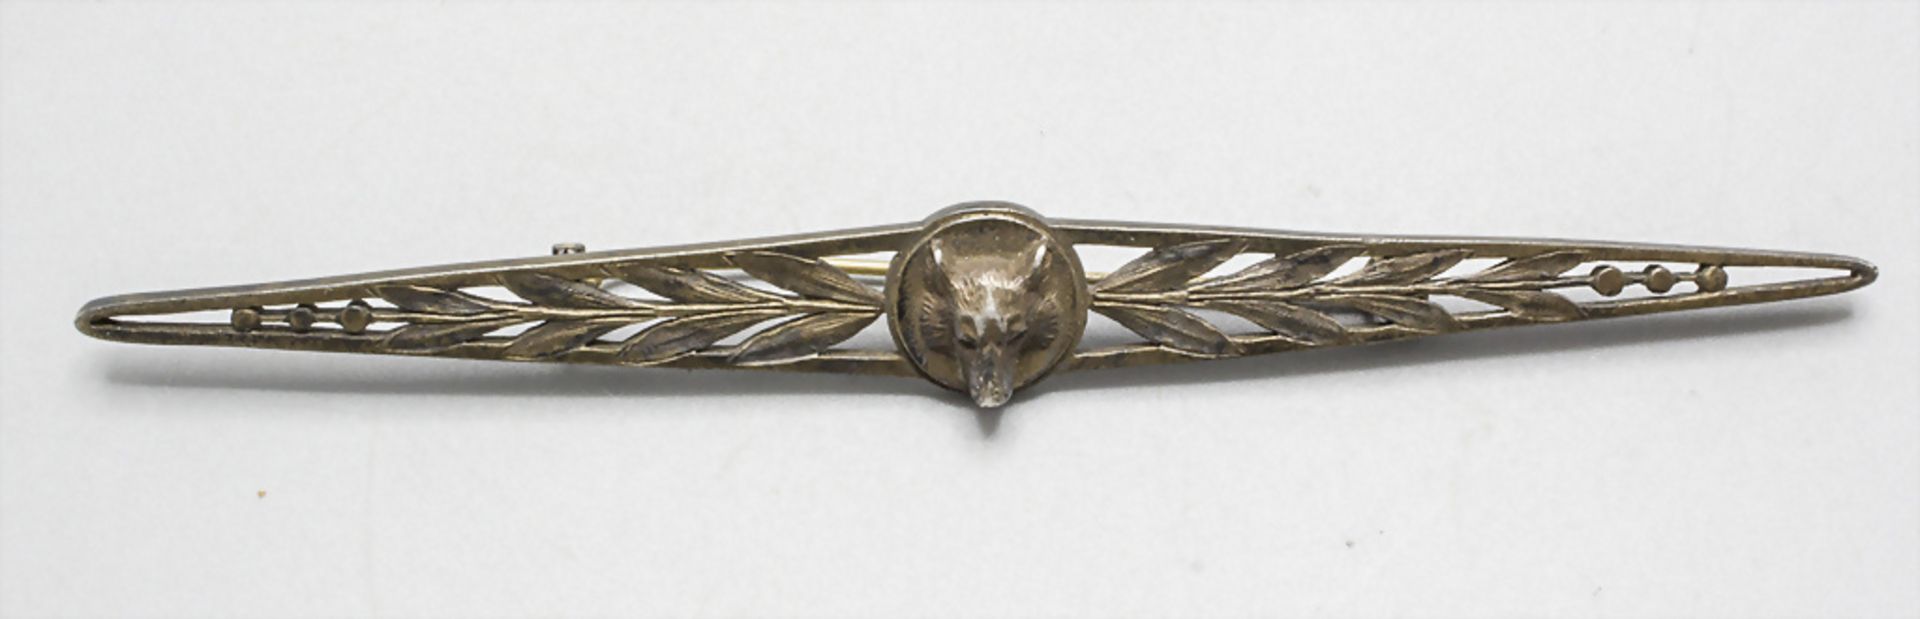 Lange Brosche mit Wolfskopf / A long silver brooch with the head of a wolf, Frankreich, 19. Jh.